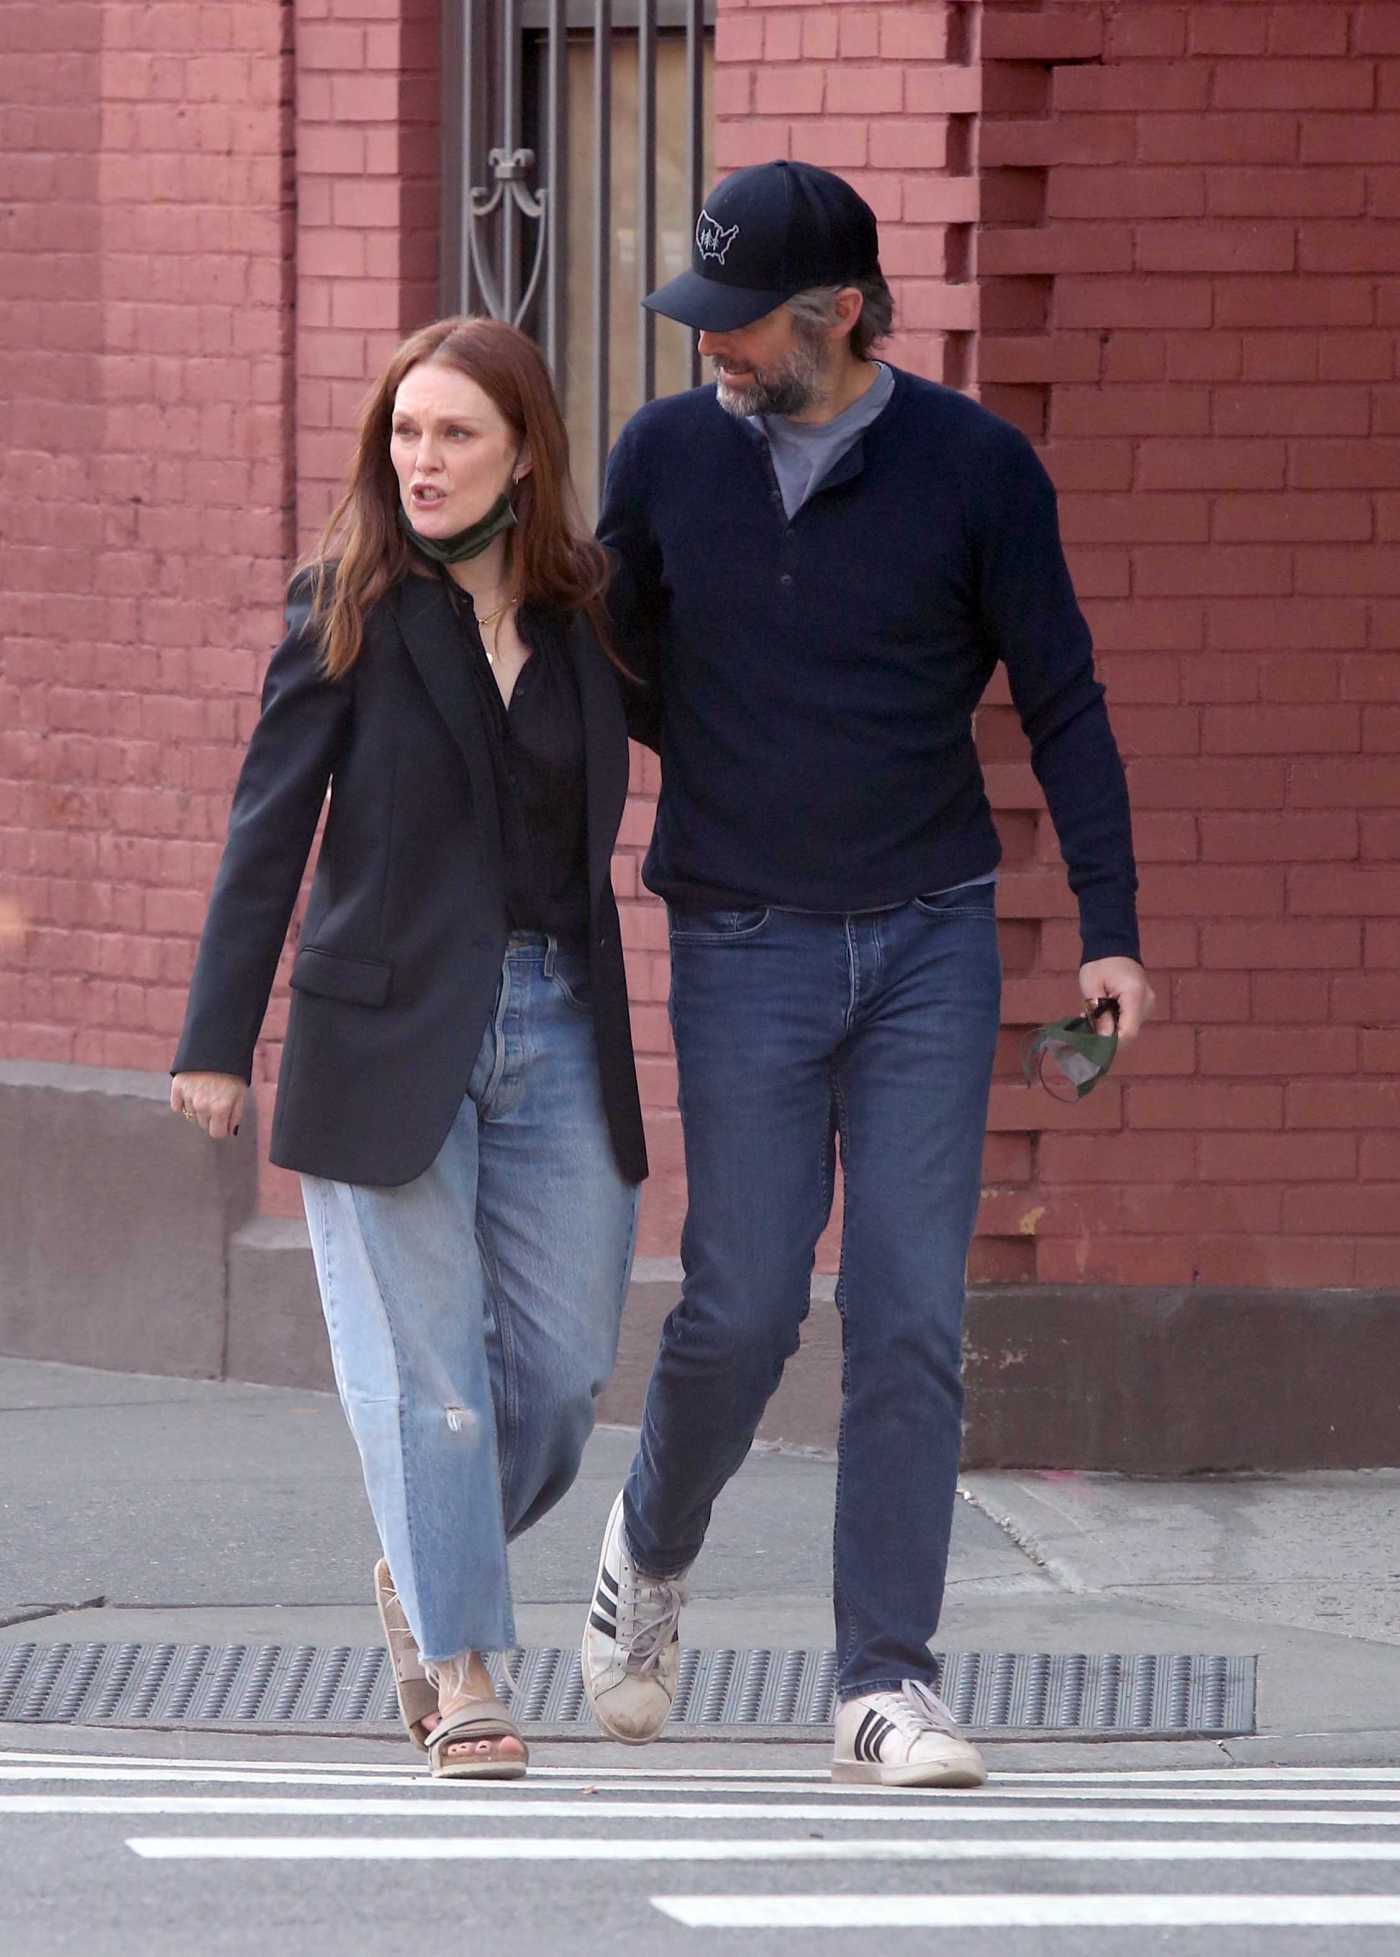 Julianne Moore in a Black Blazer Was Seen Out with Bart Freundlich in the West Village, New York 05/17/2021